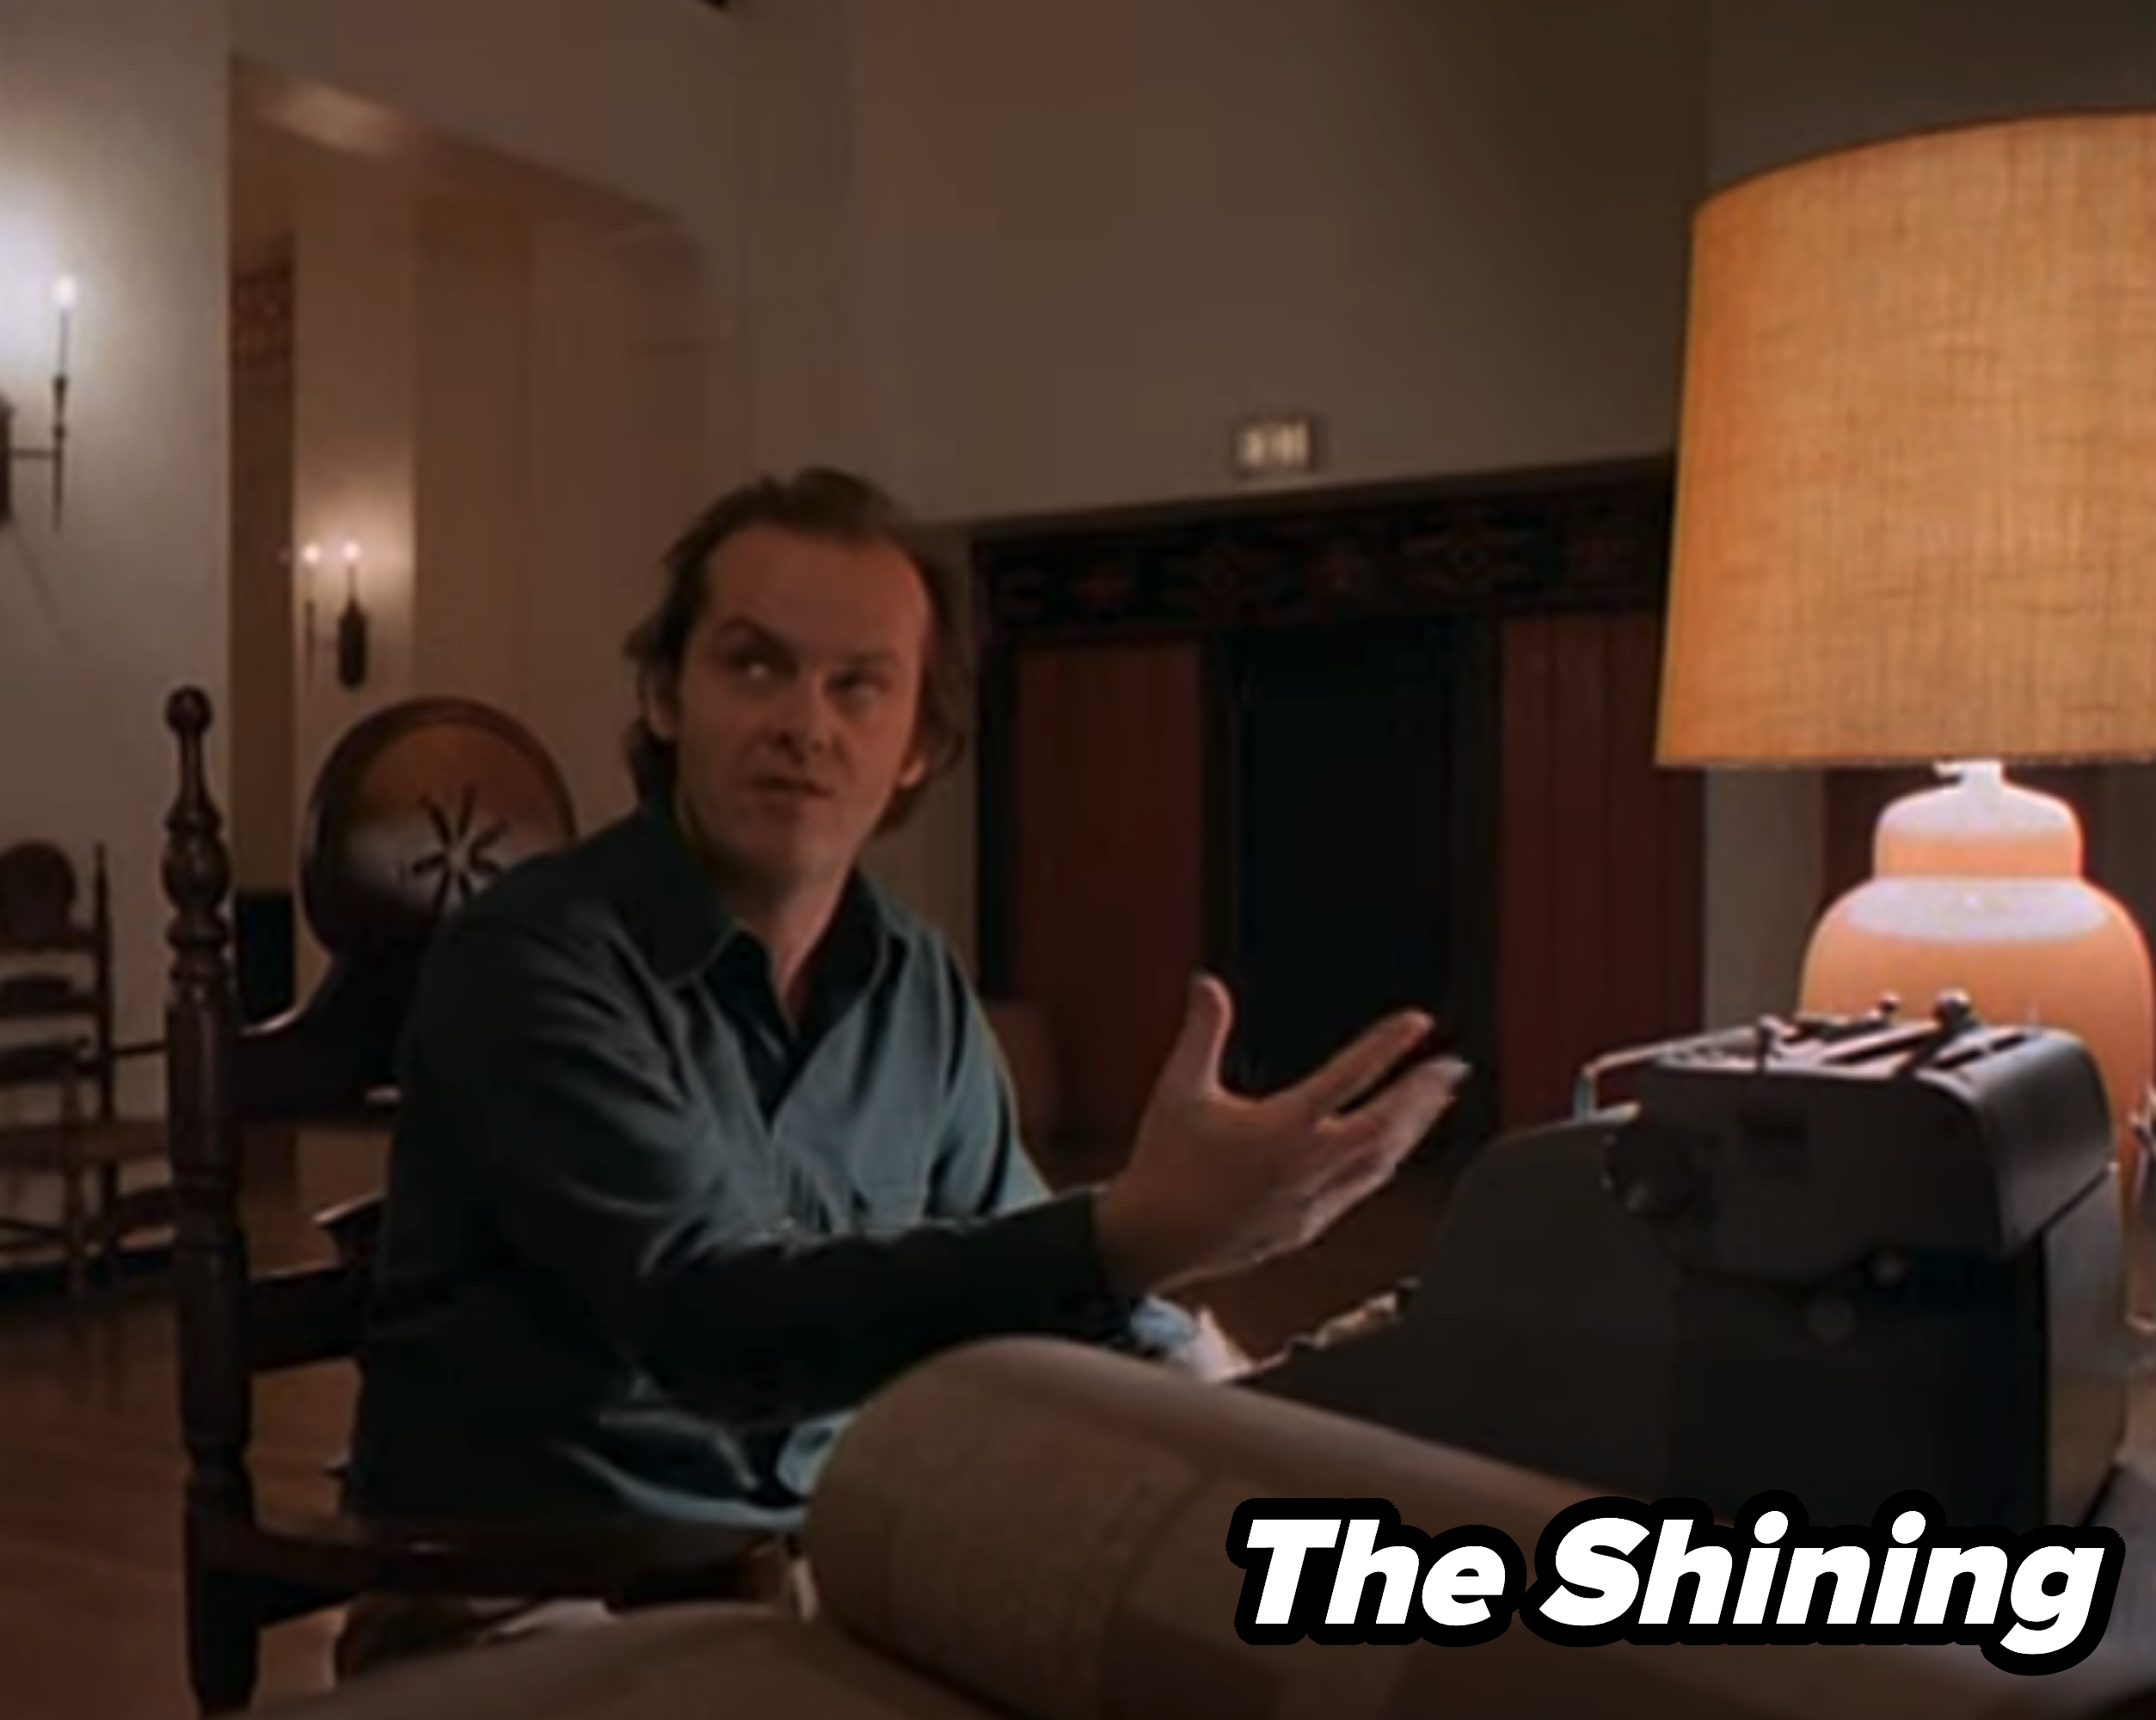 Scene of Jack at the typewriter from The Shining